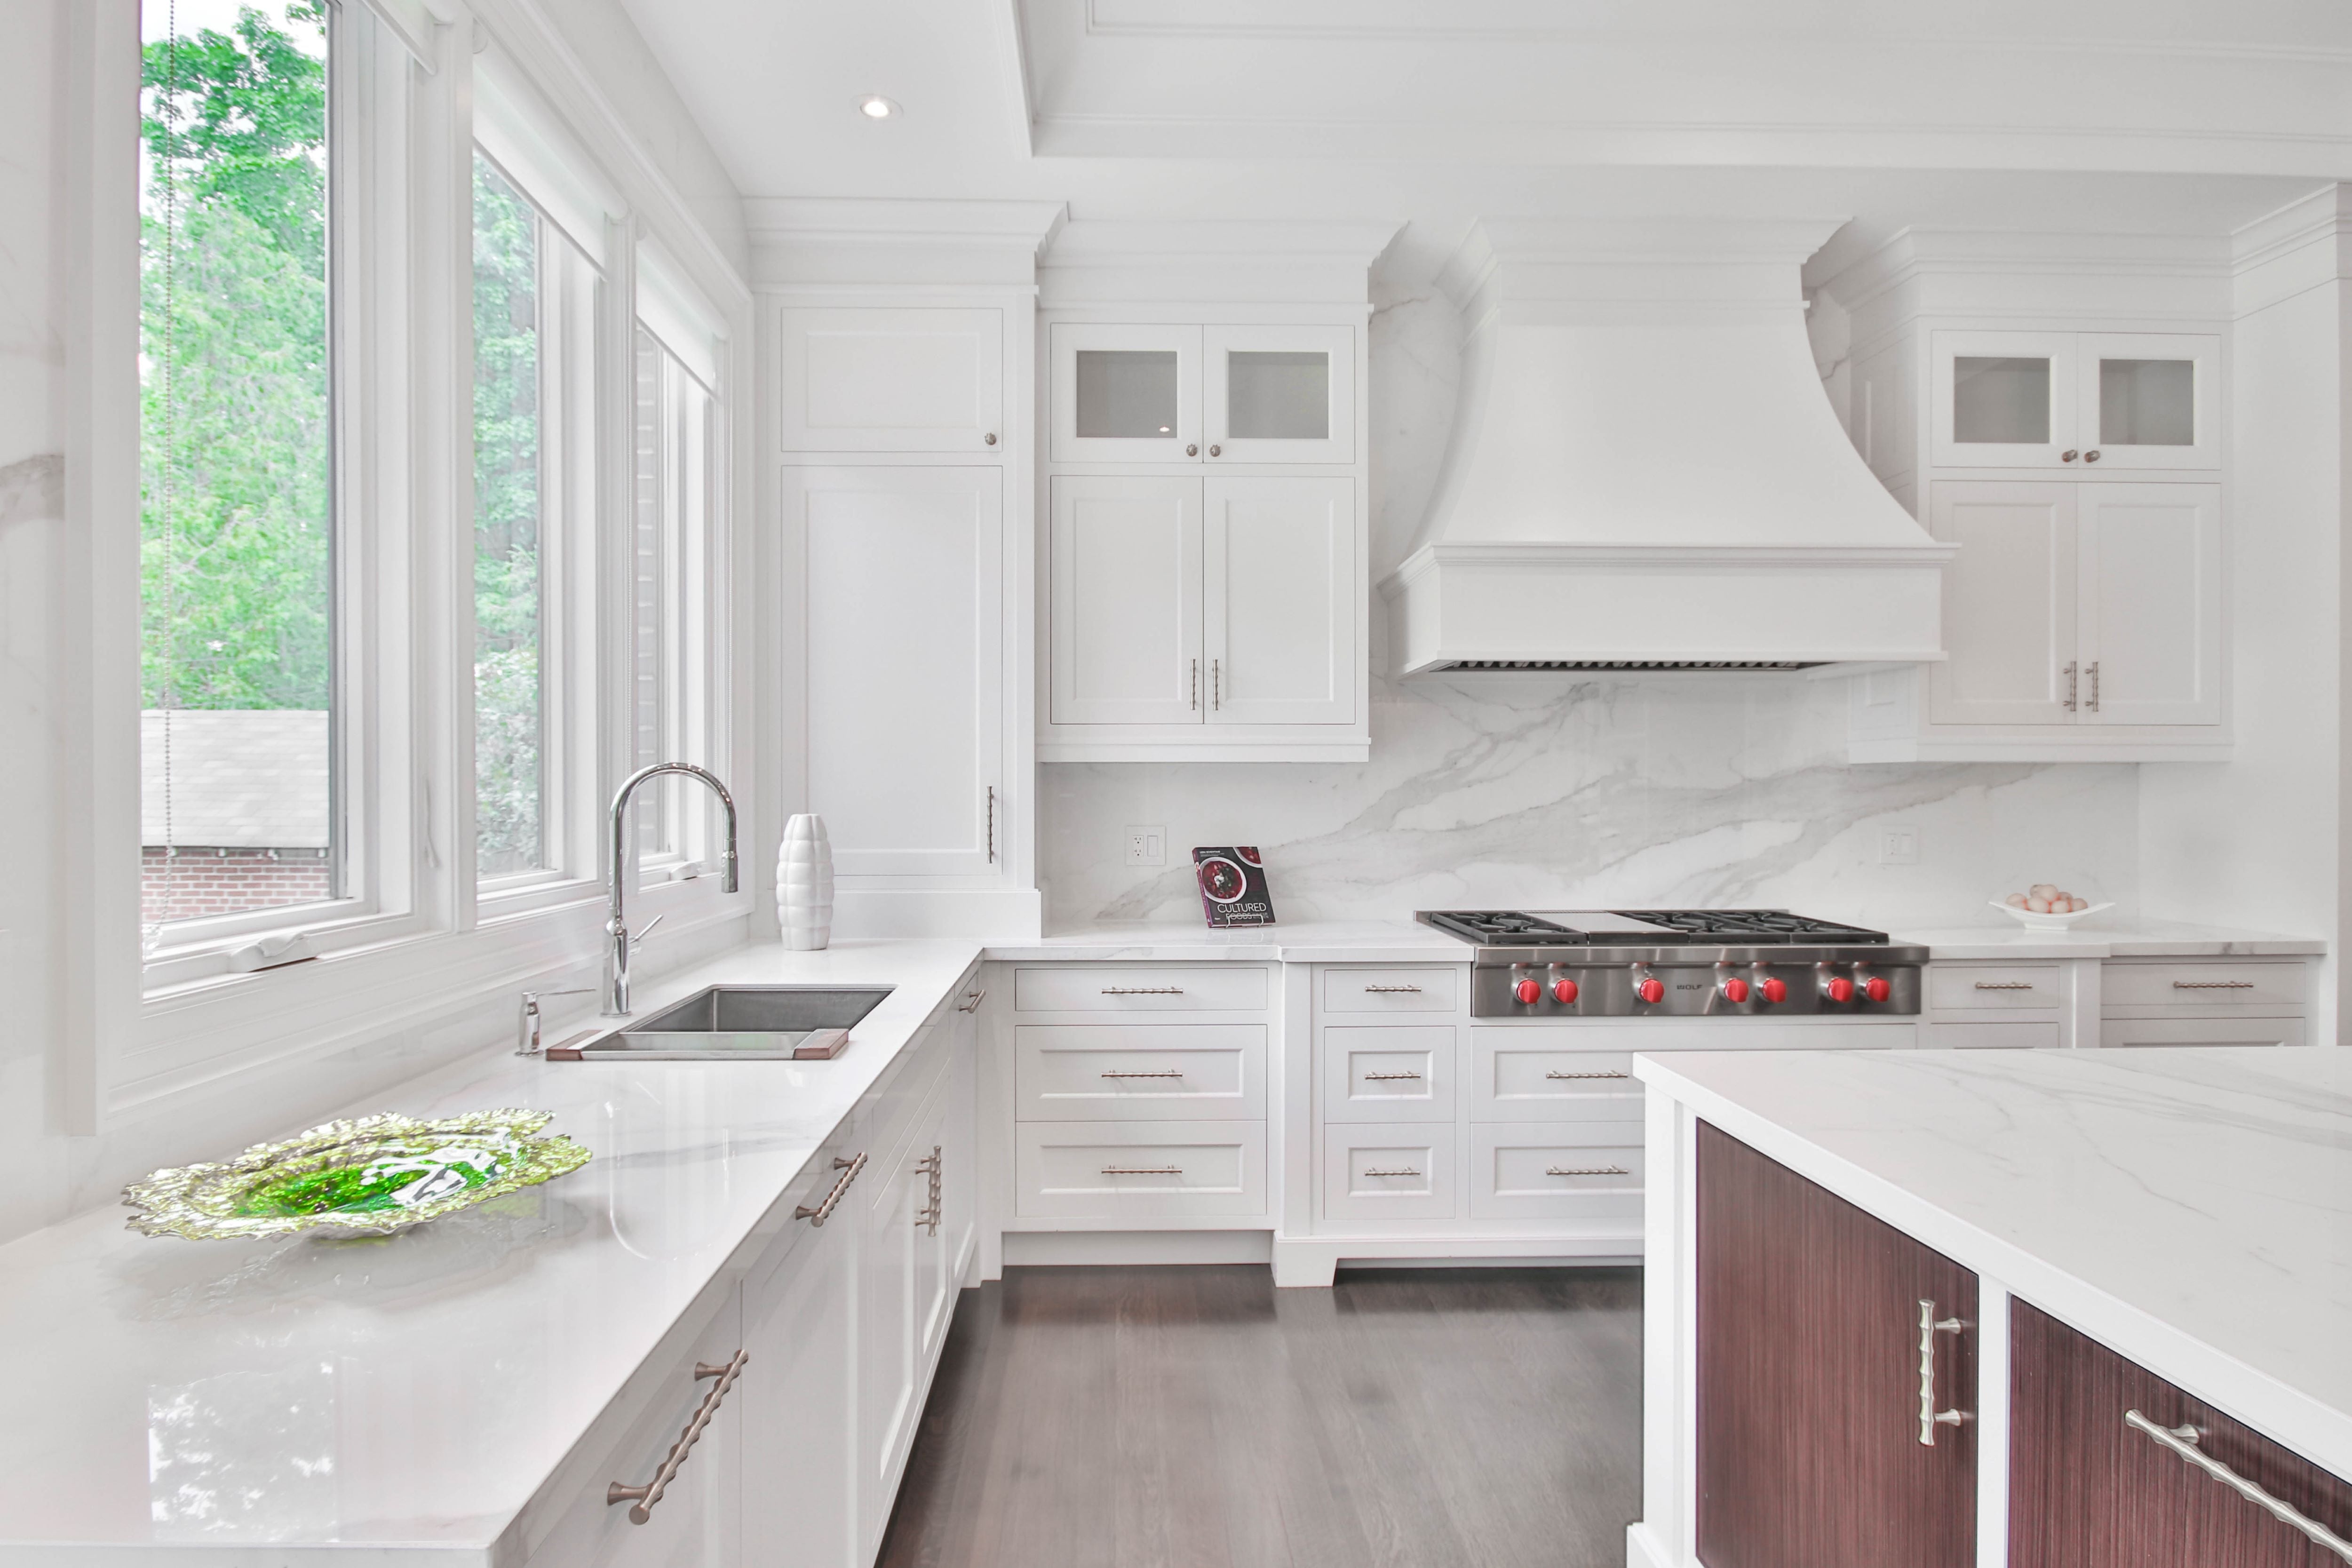 kitchen cabinets and how important it is to get good ones.